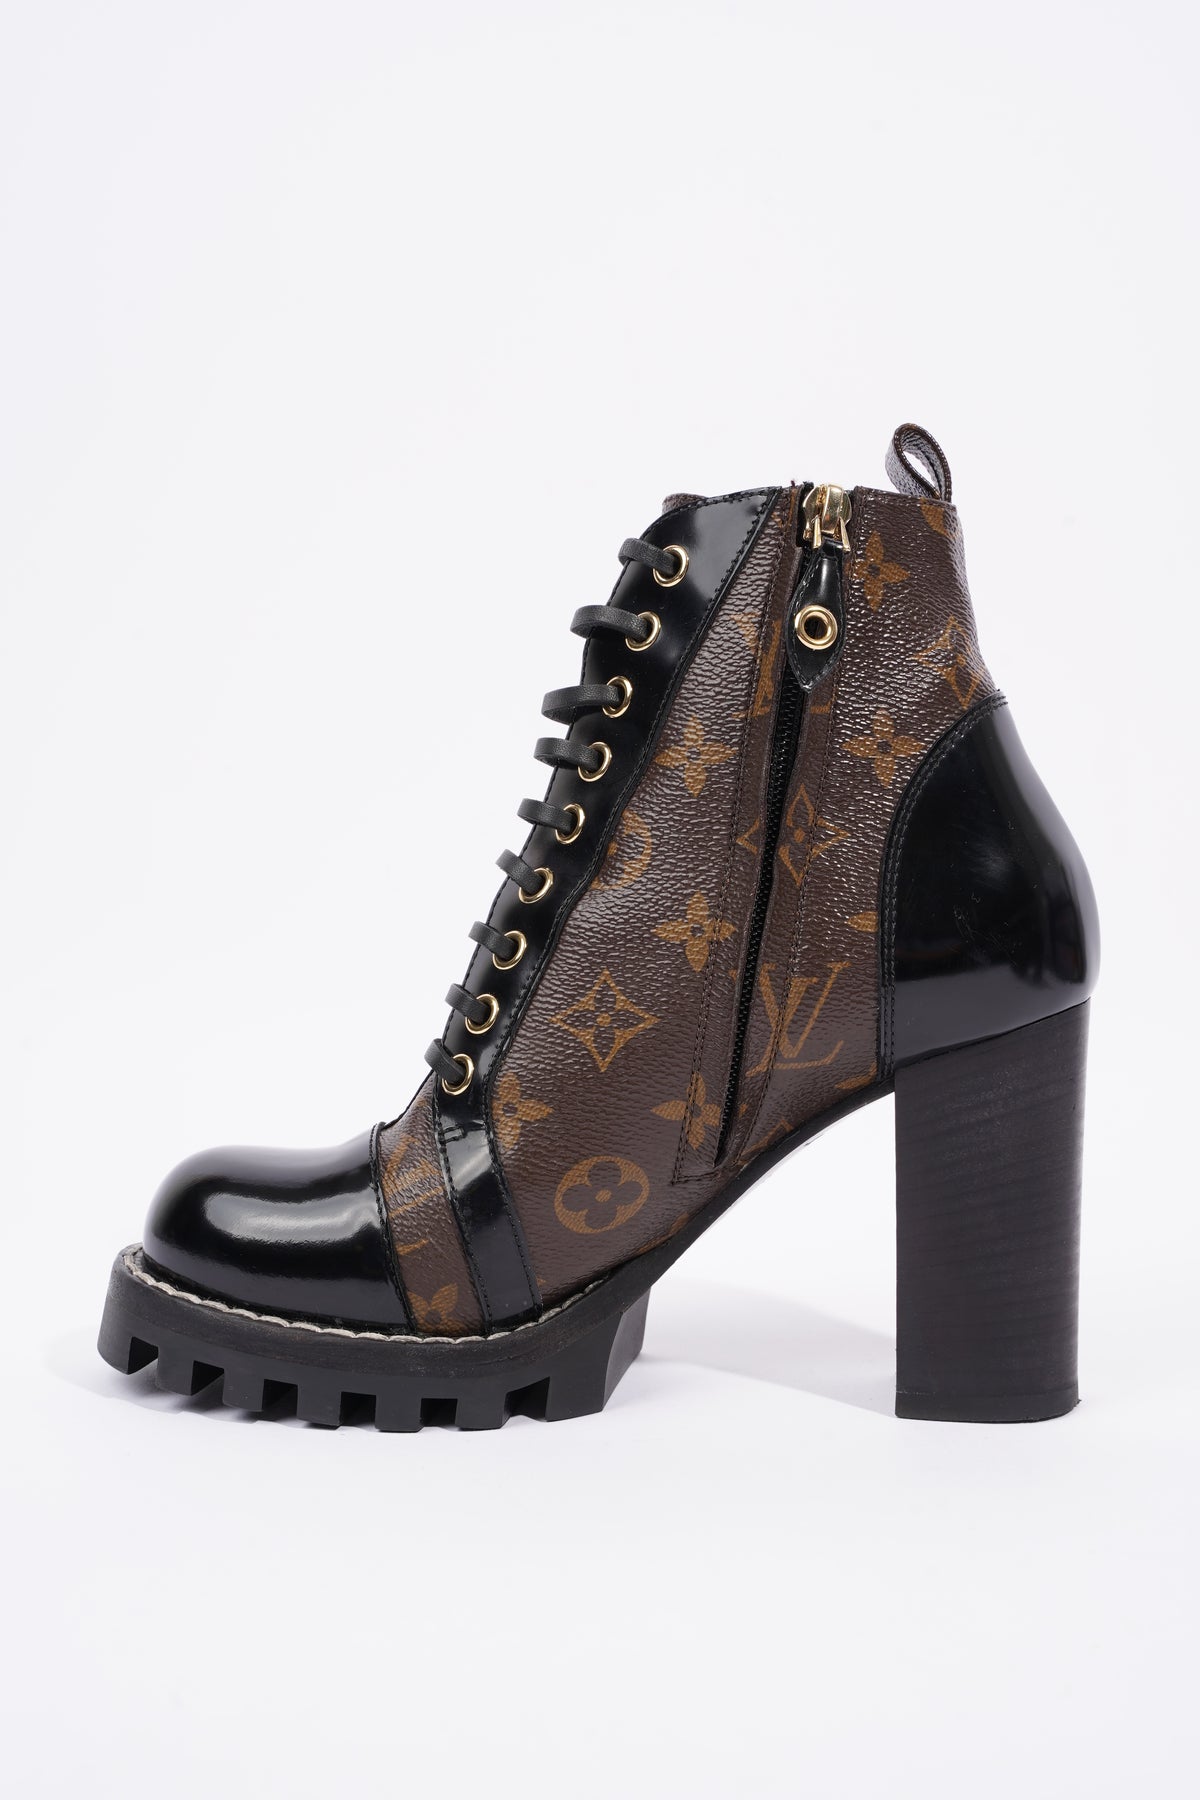 Authentic Louis Vuitton Star Trail Ankle Boots Size 36 Sold Out USA Seller